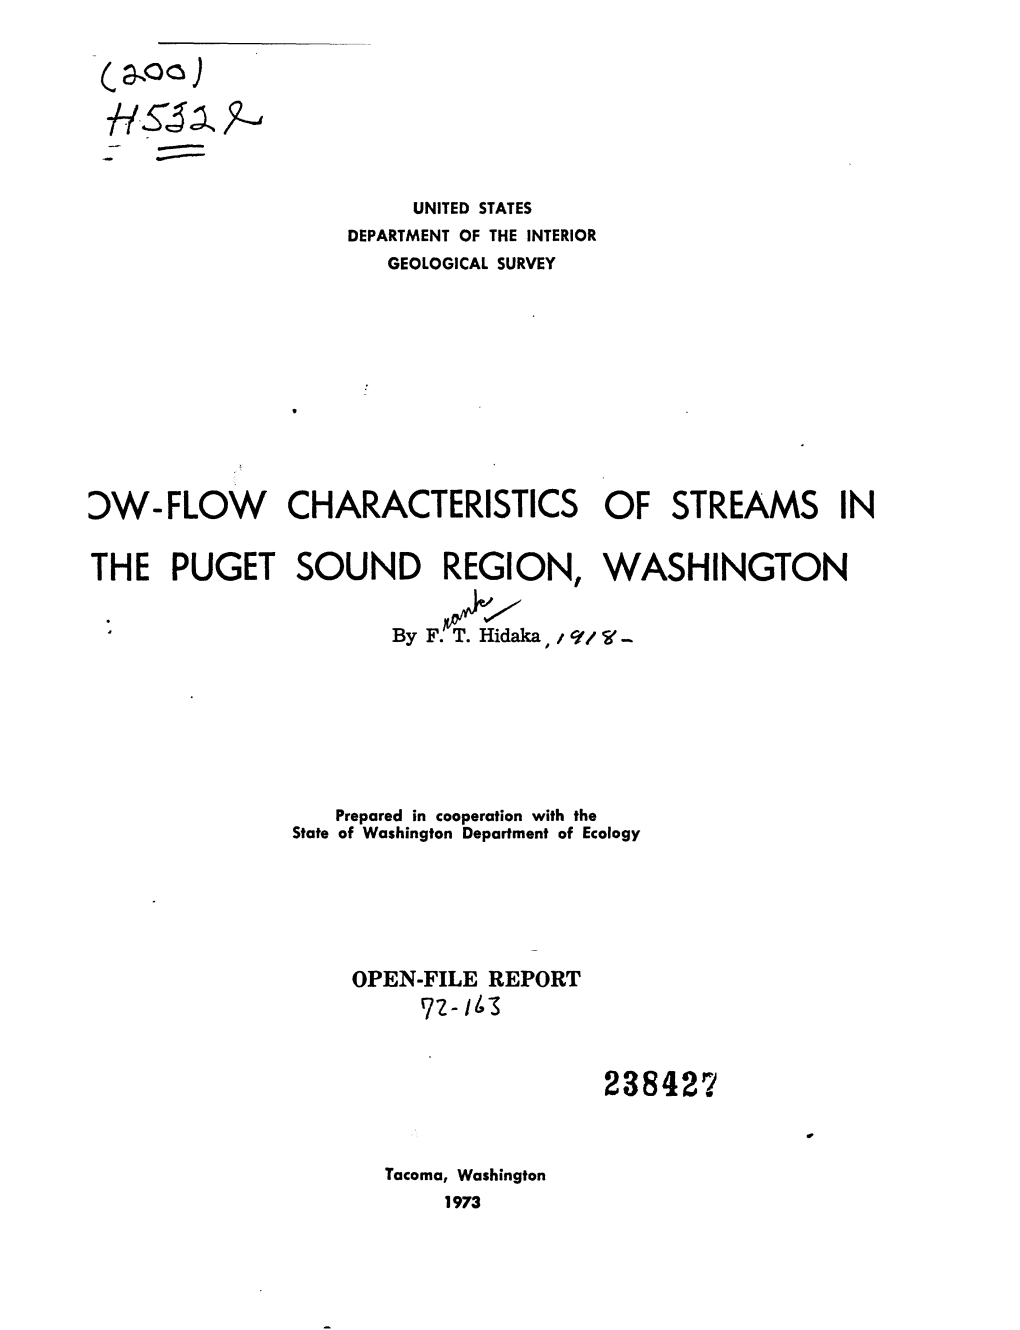 Low-Flow Characteristics of Streams in the Puget Sound Region, Washington